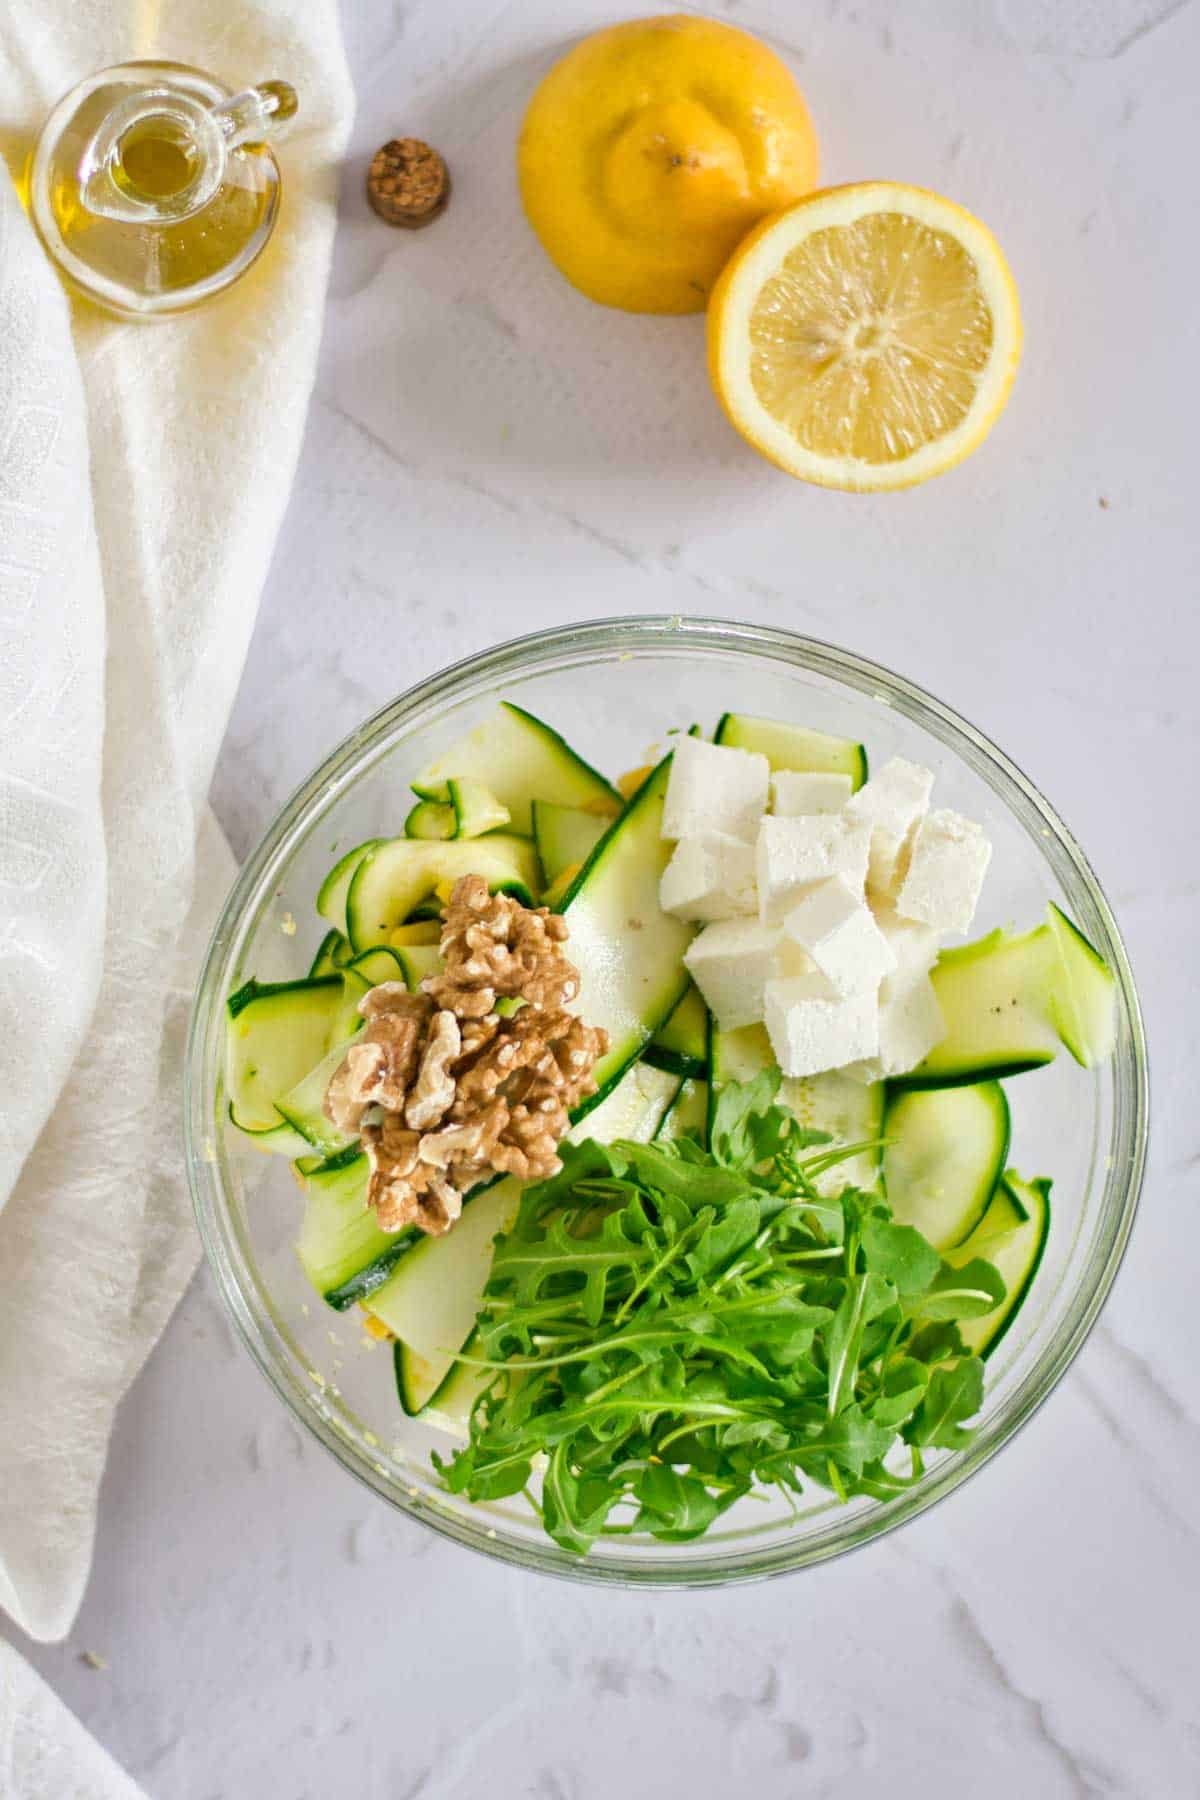 A bowl of arugula, cucumber ribbons, feta cheese, and walnuts with lemons and olive oil on the side on a white surface.